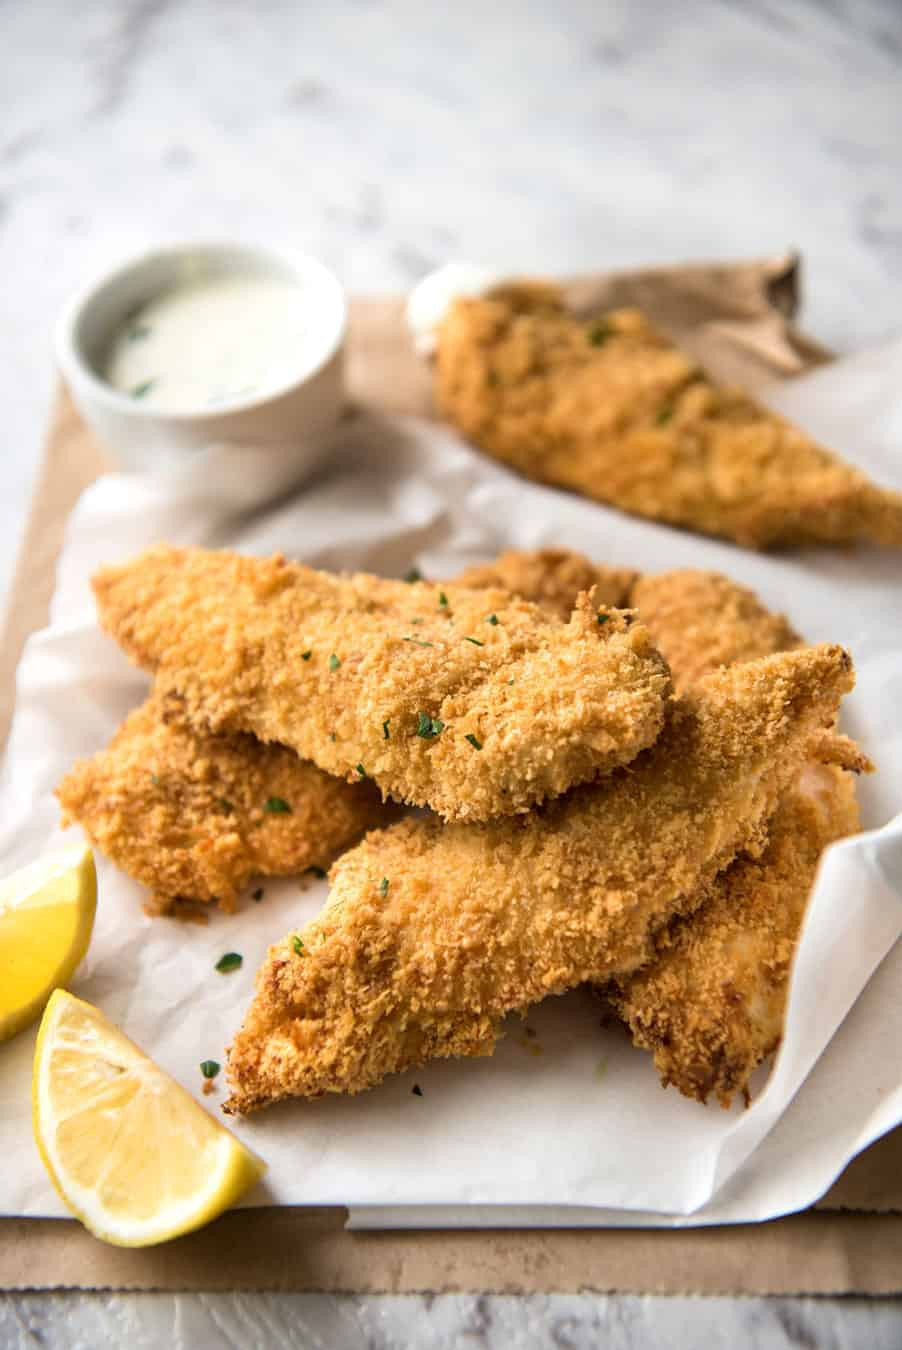 Recipes With Chicken Tenders
 Oven Fried Parmesan Chicken Tenders